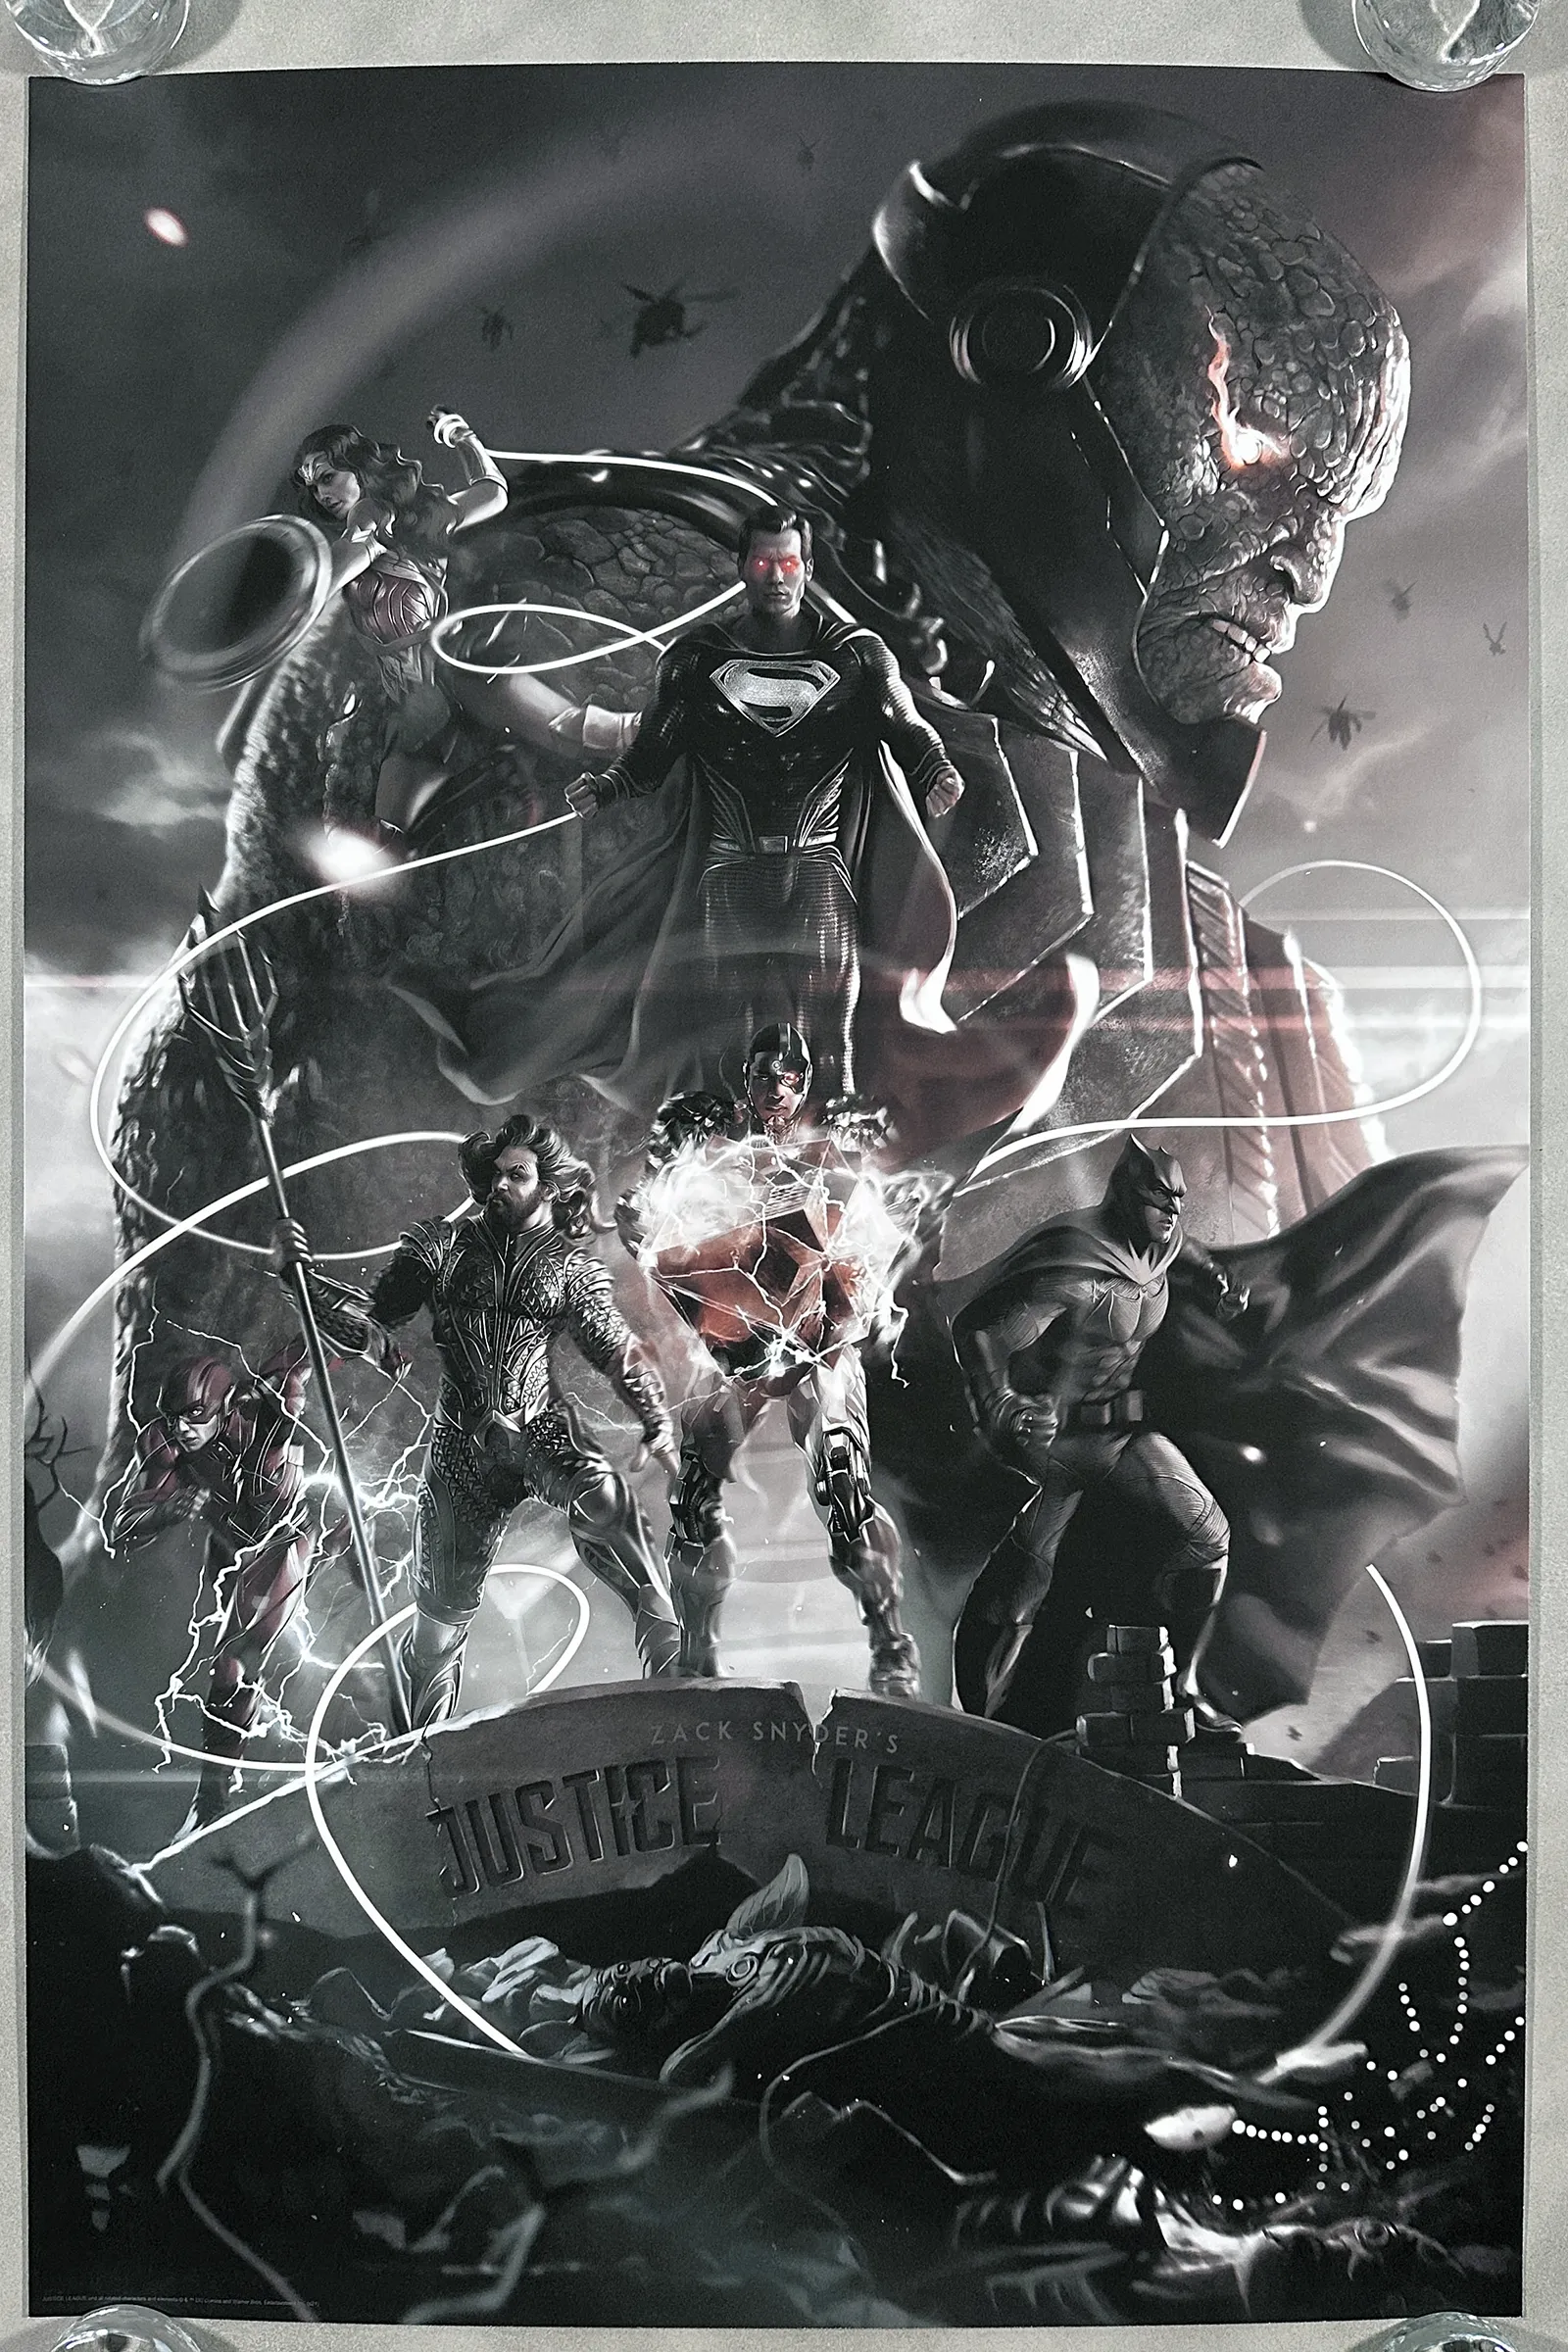 Zack Snyders Justice League Variant By Ann Bembi Limited Edition Posters Poster Pirate 